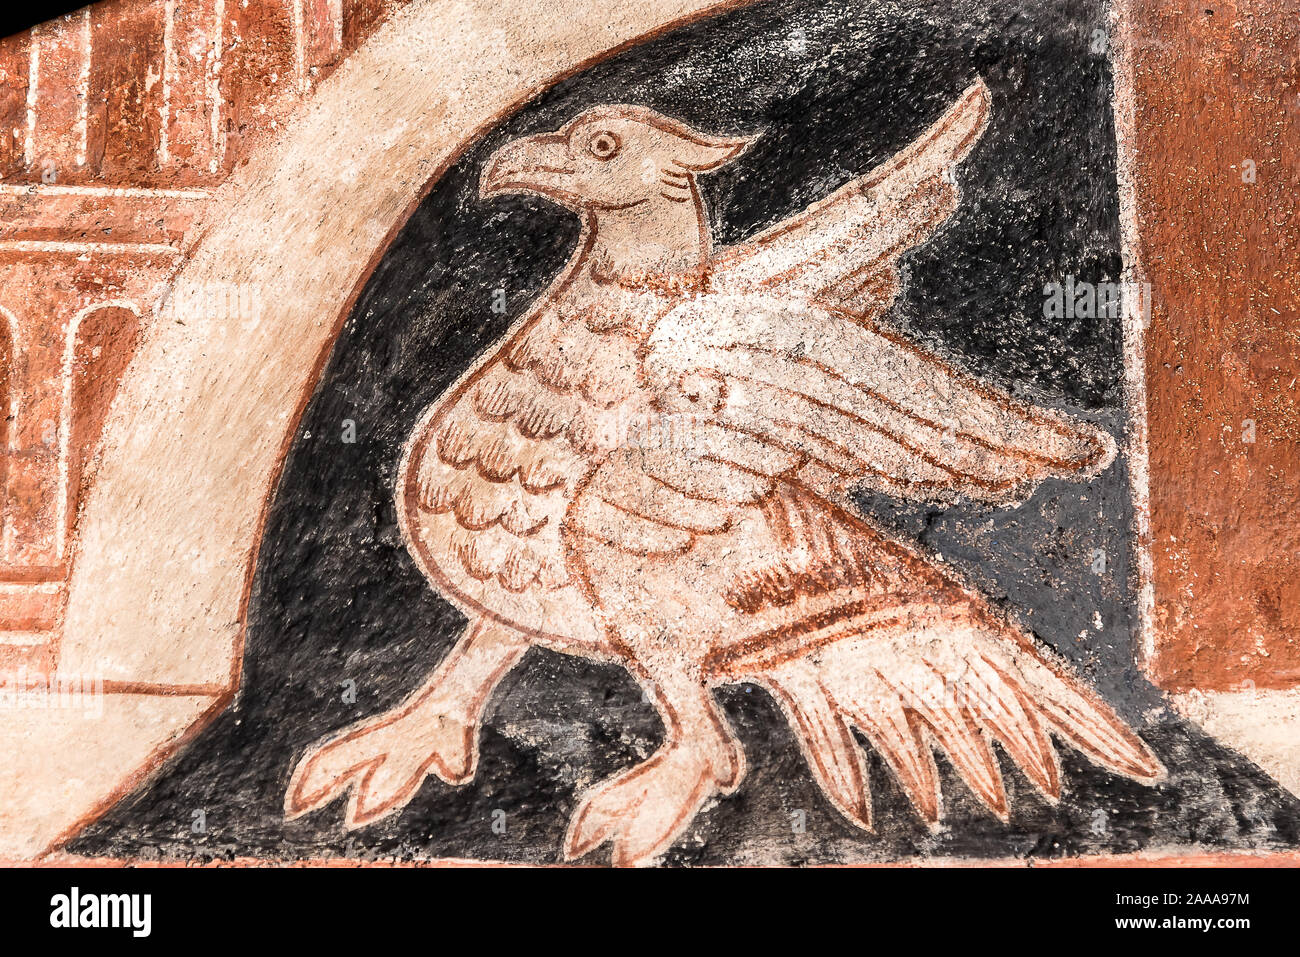 A mythical creature with the head and wings of an eagle, a medieval fresco in Skibby church, Denmark, November 20, 2019 Stock Photo